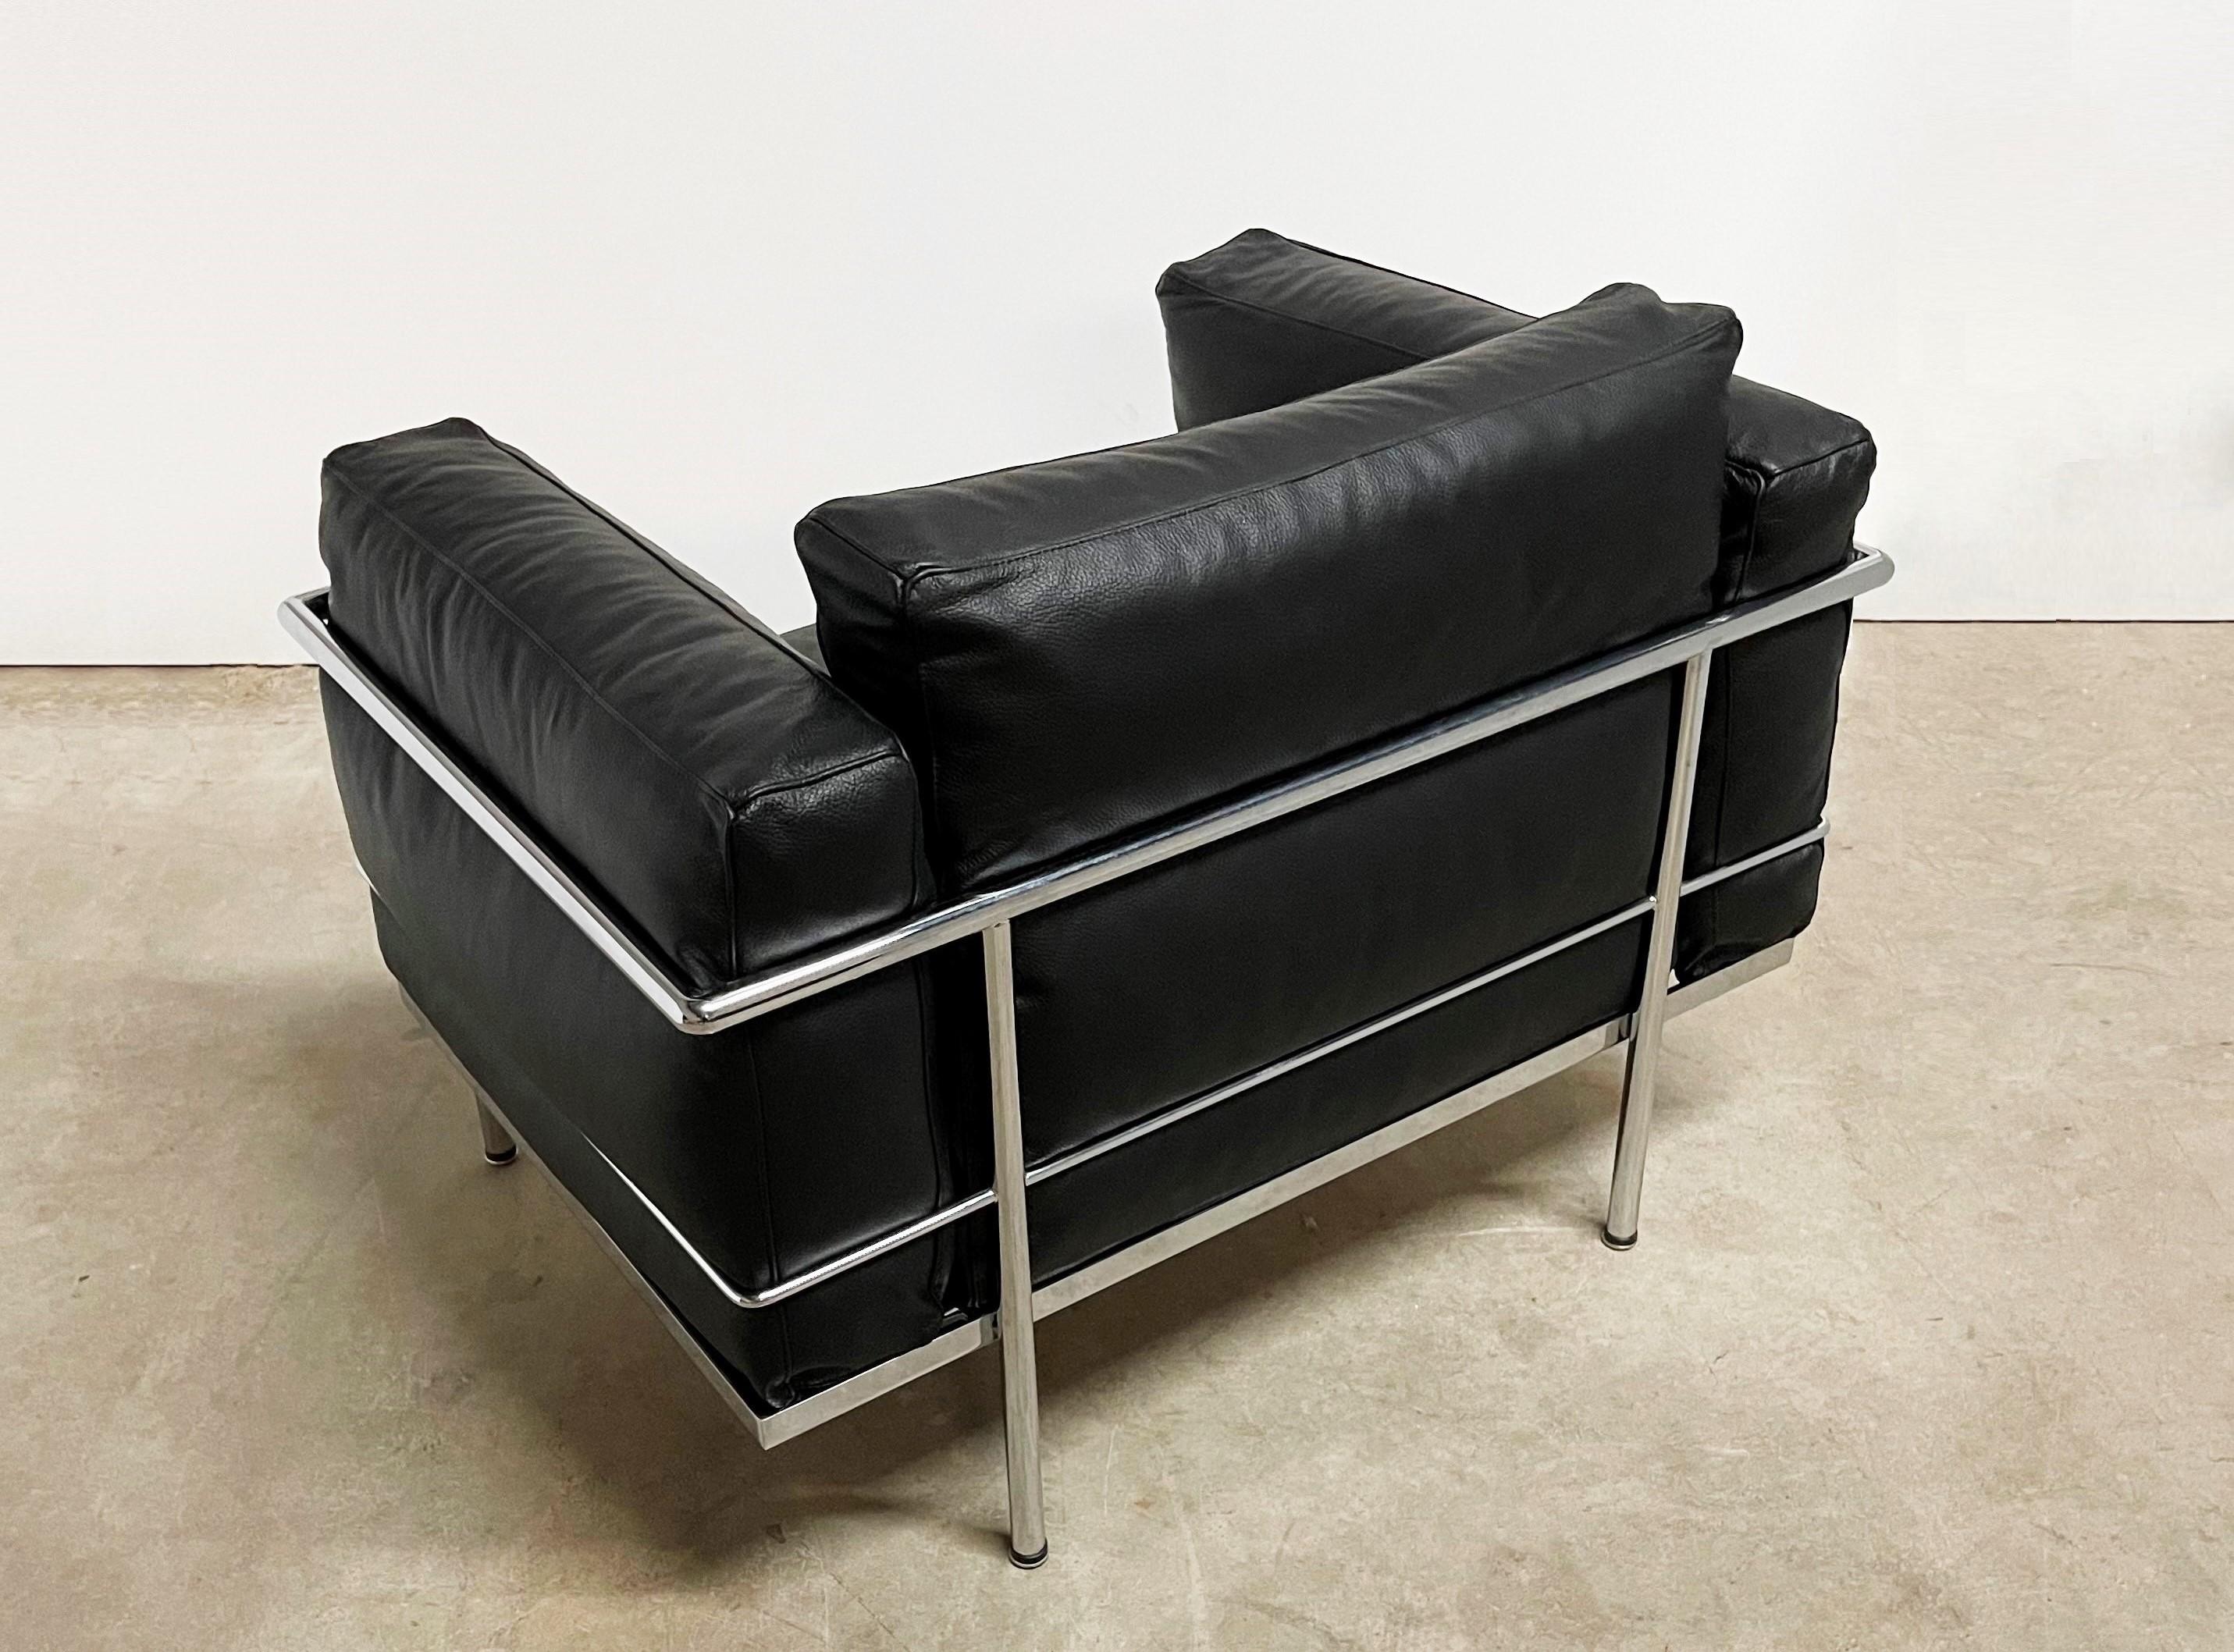 Leather Pierre Jeanneret, Charlotte Perriand & Le Corbusier Grand Comfort Lounge Chairs For Sale